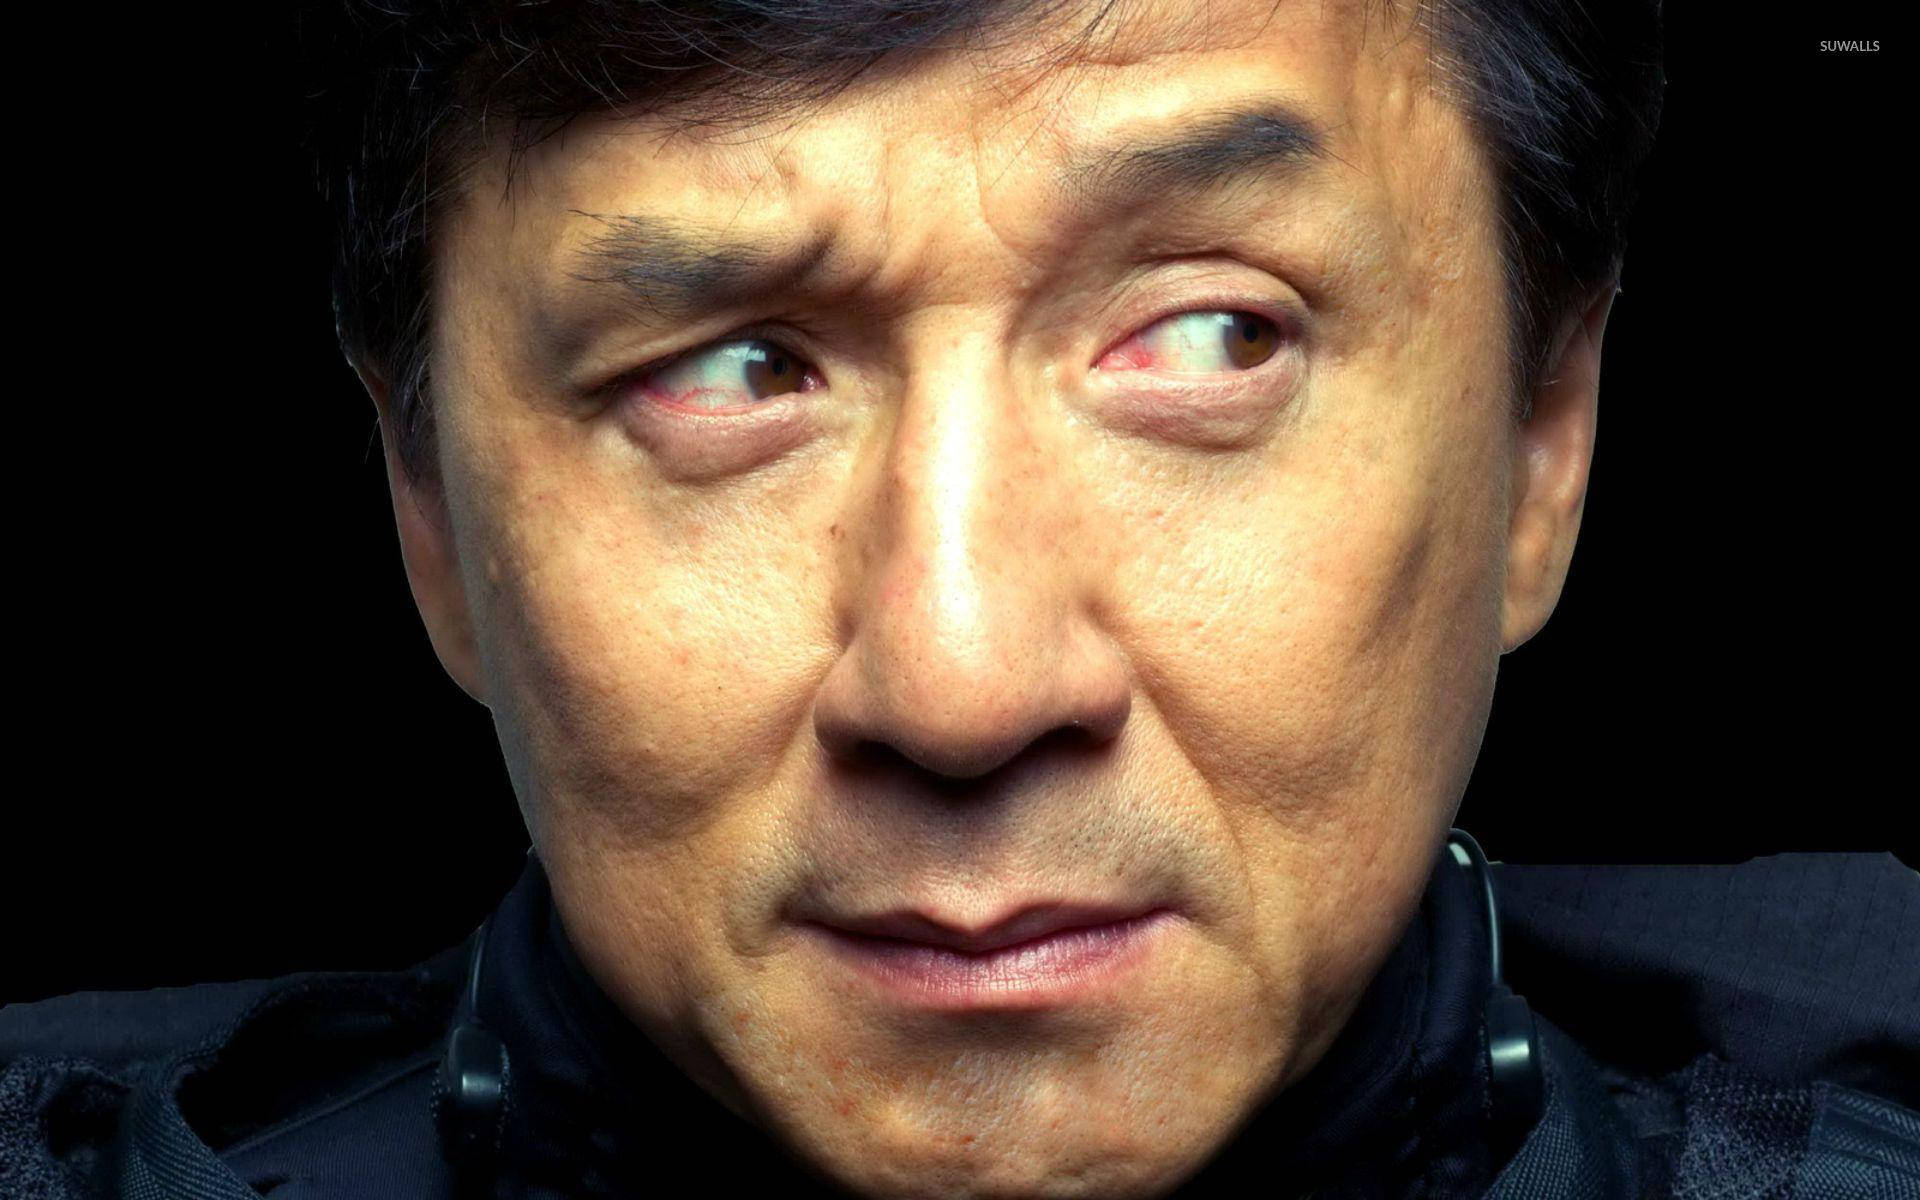 "Jackie Chan Giving A Skeptical Look" Wallpaper